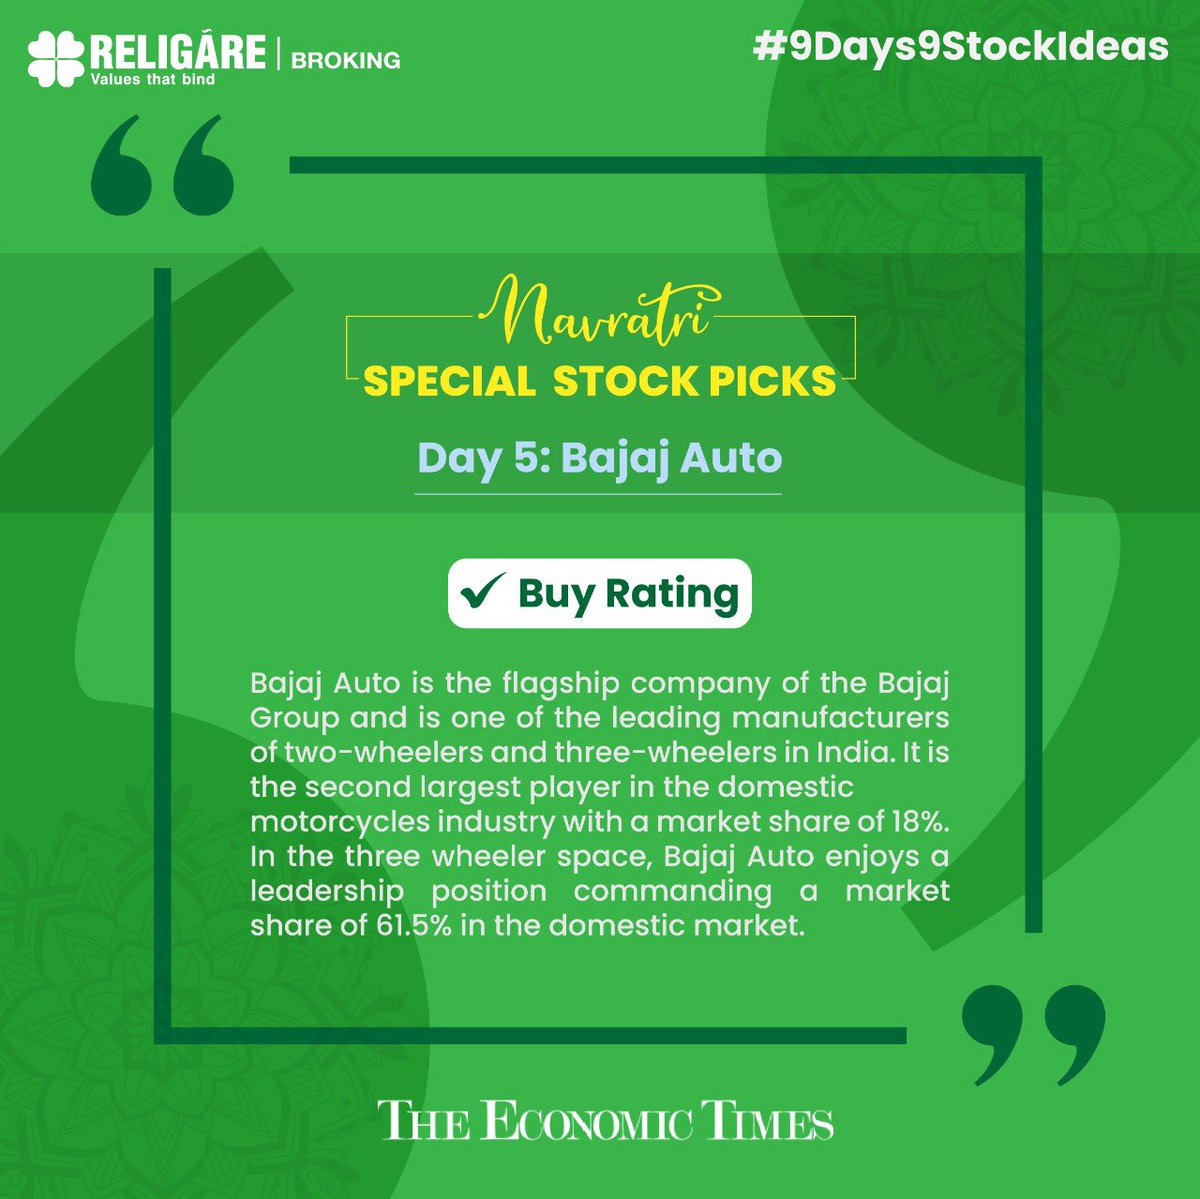 Navratri Special Stock Ideas by Religare Broking

Day 5: Bajaj Auto

Read Here: bit.ly/3Rrgn6z

@EconomicTimes 

#9Days9StockIdeas #BajajAuto #Stocks #StockMarket #Investment #Trading #ReligareBroking